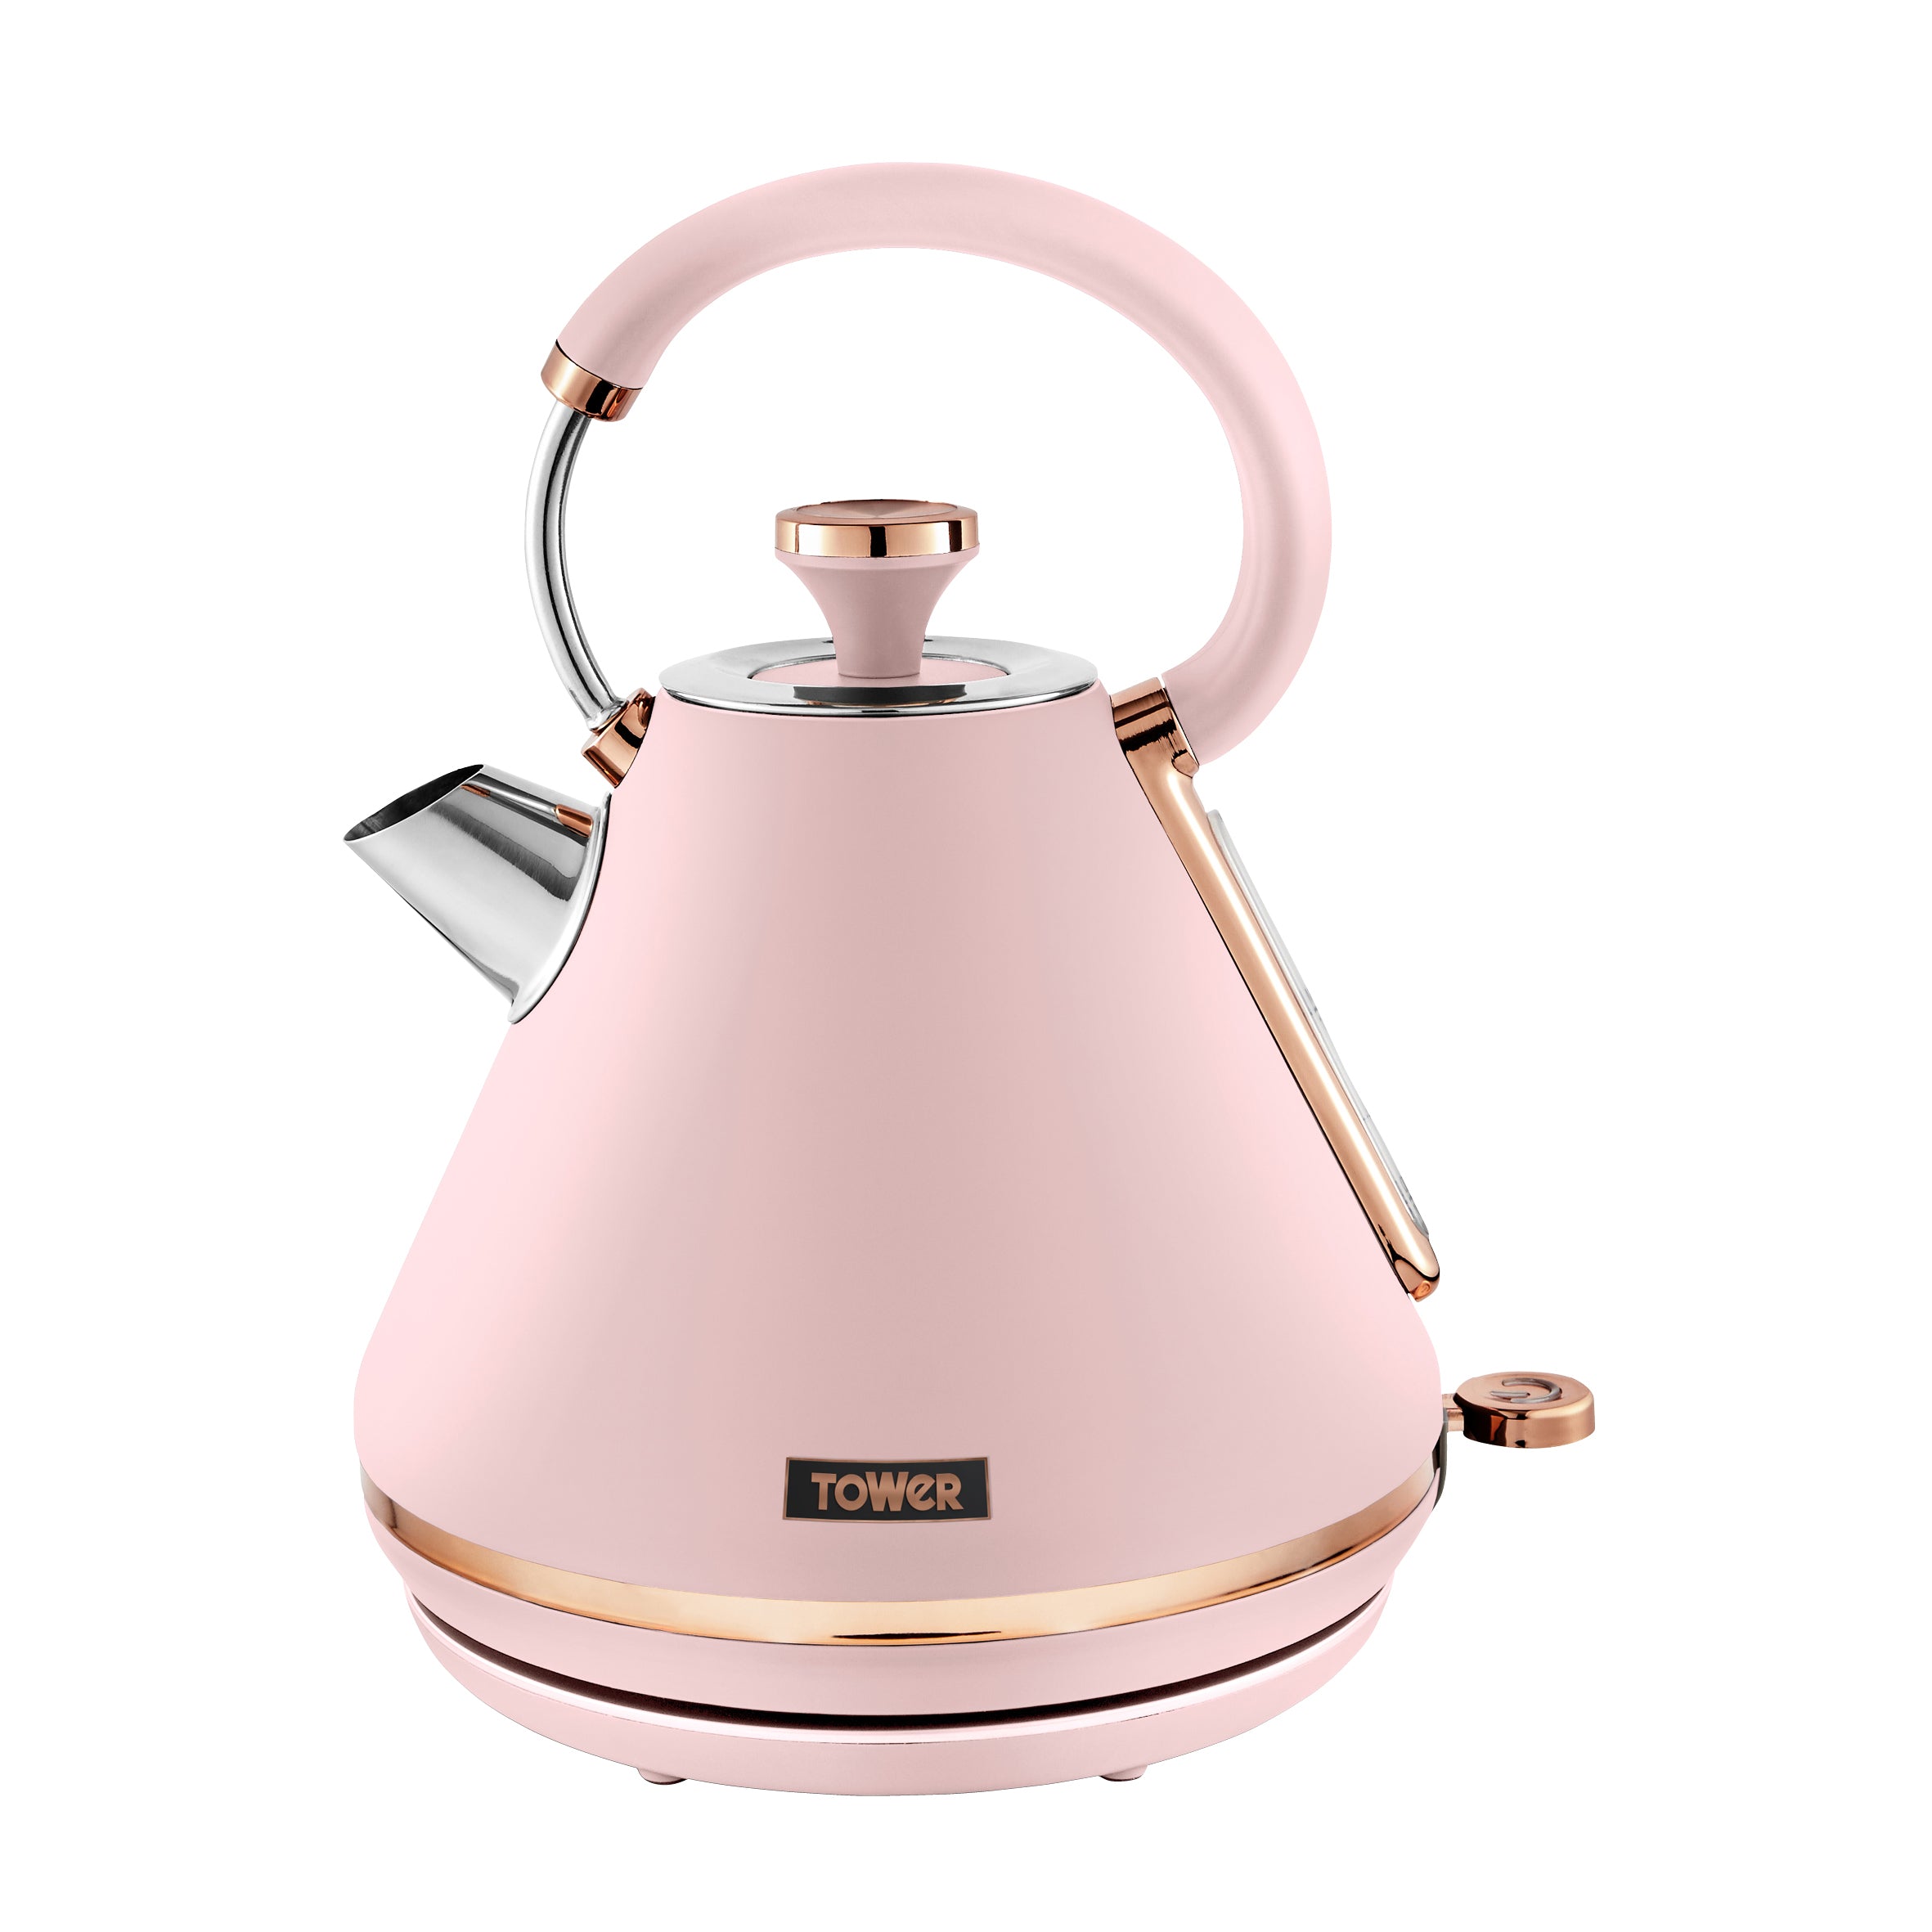 Tower Cavaletto 3KW 1.7 Litre Pyramid Kettle - Pink  | TJ Hughes